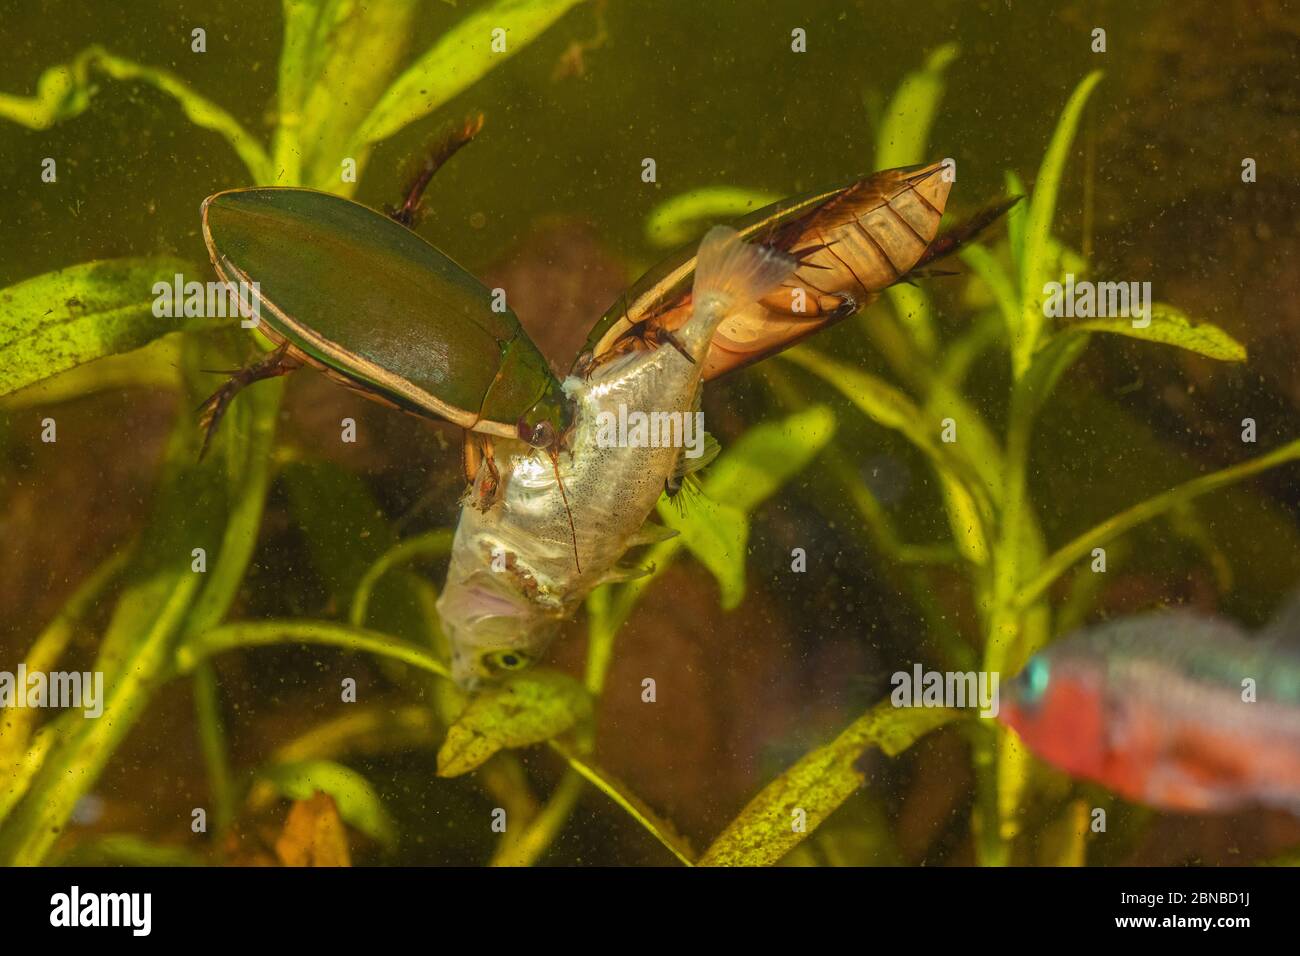 Diving Beetle (Cybister lateralimarginalis, Scaphinectes lateralimarginalis), two beetles feed on three-spined stickleback, Germany Stock Photo